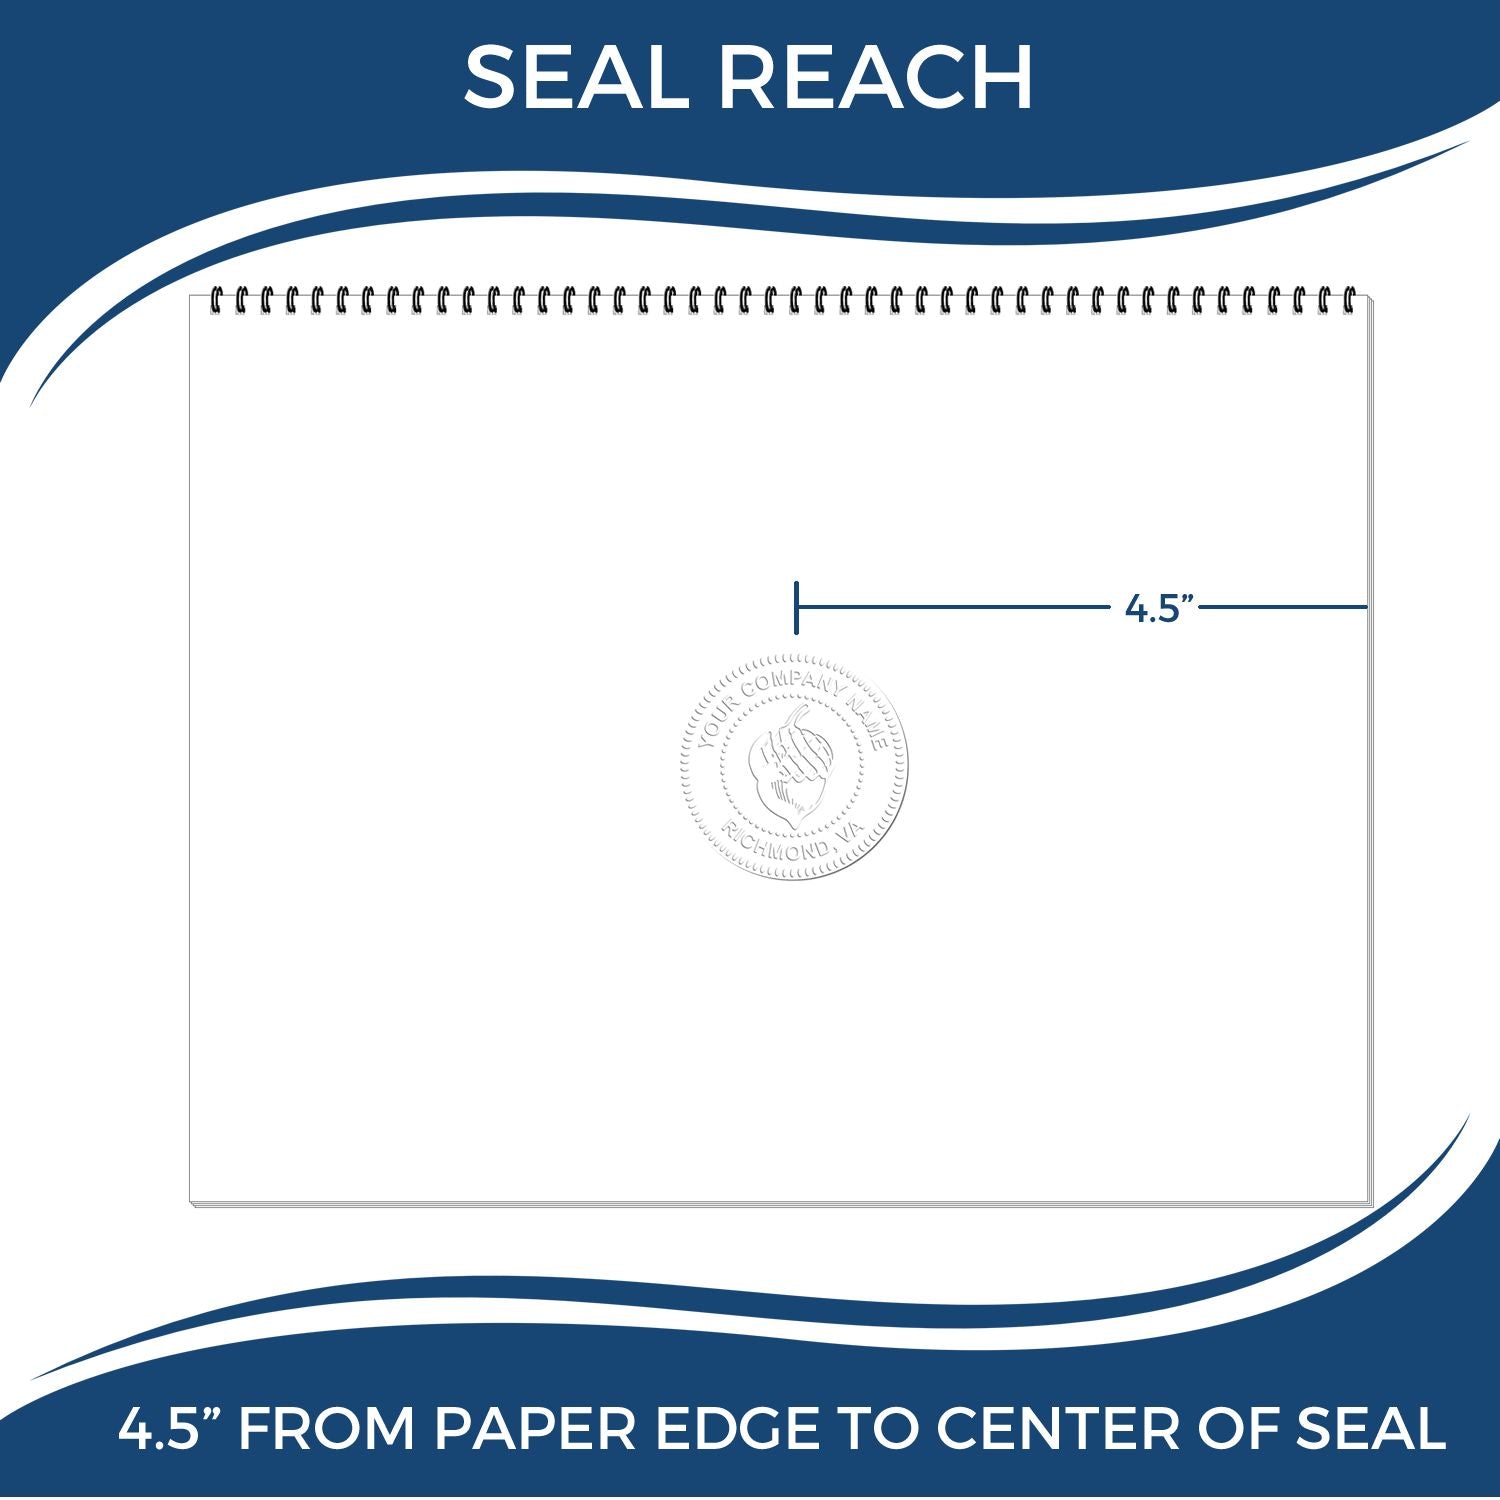 An infographic showing the seal reach which is represented by a ruler and a miniature seal image of the State of Indiana Extended Long Reach Geologist Seal